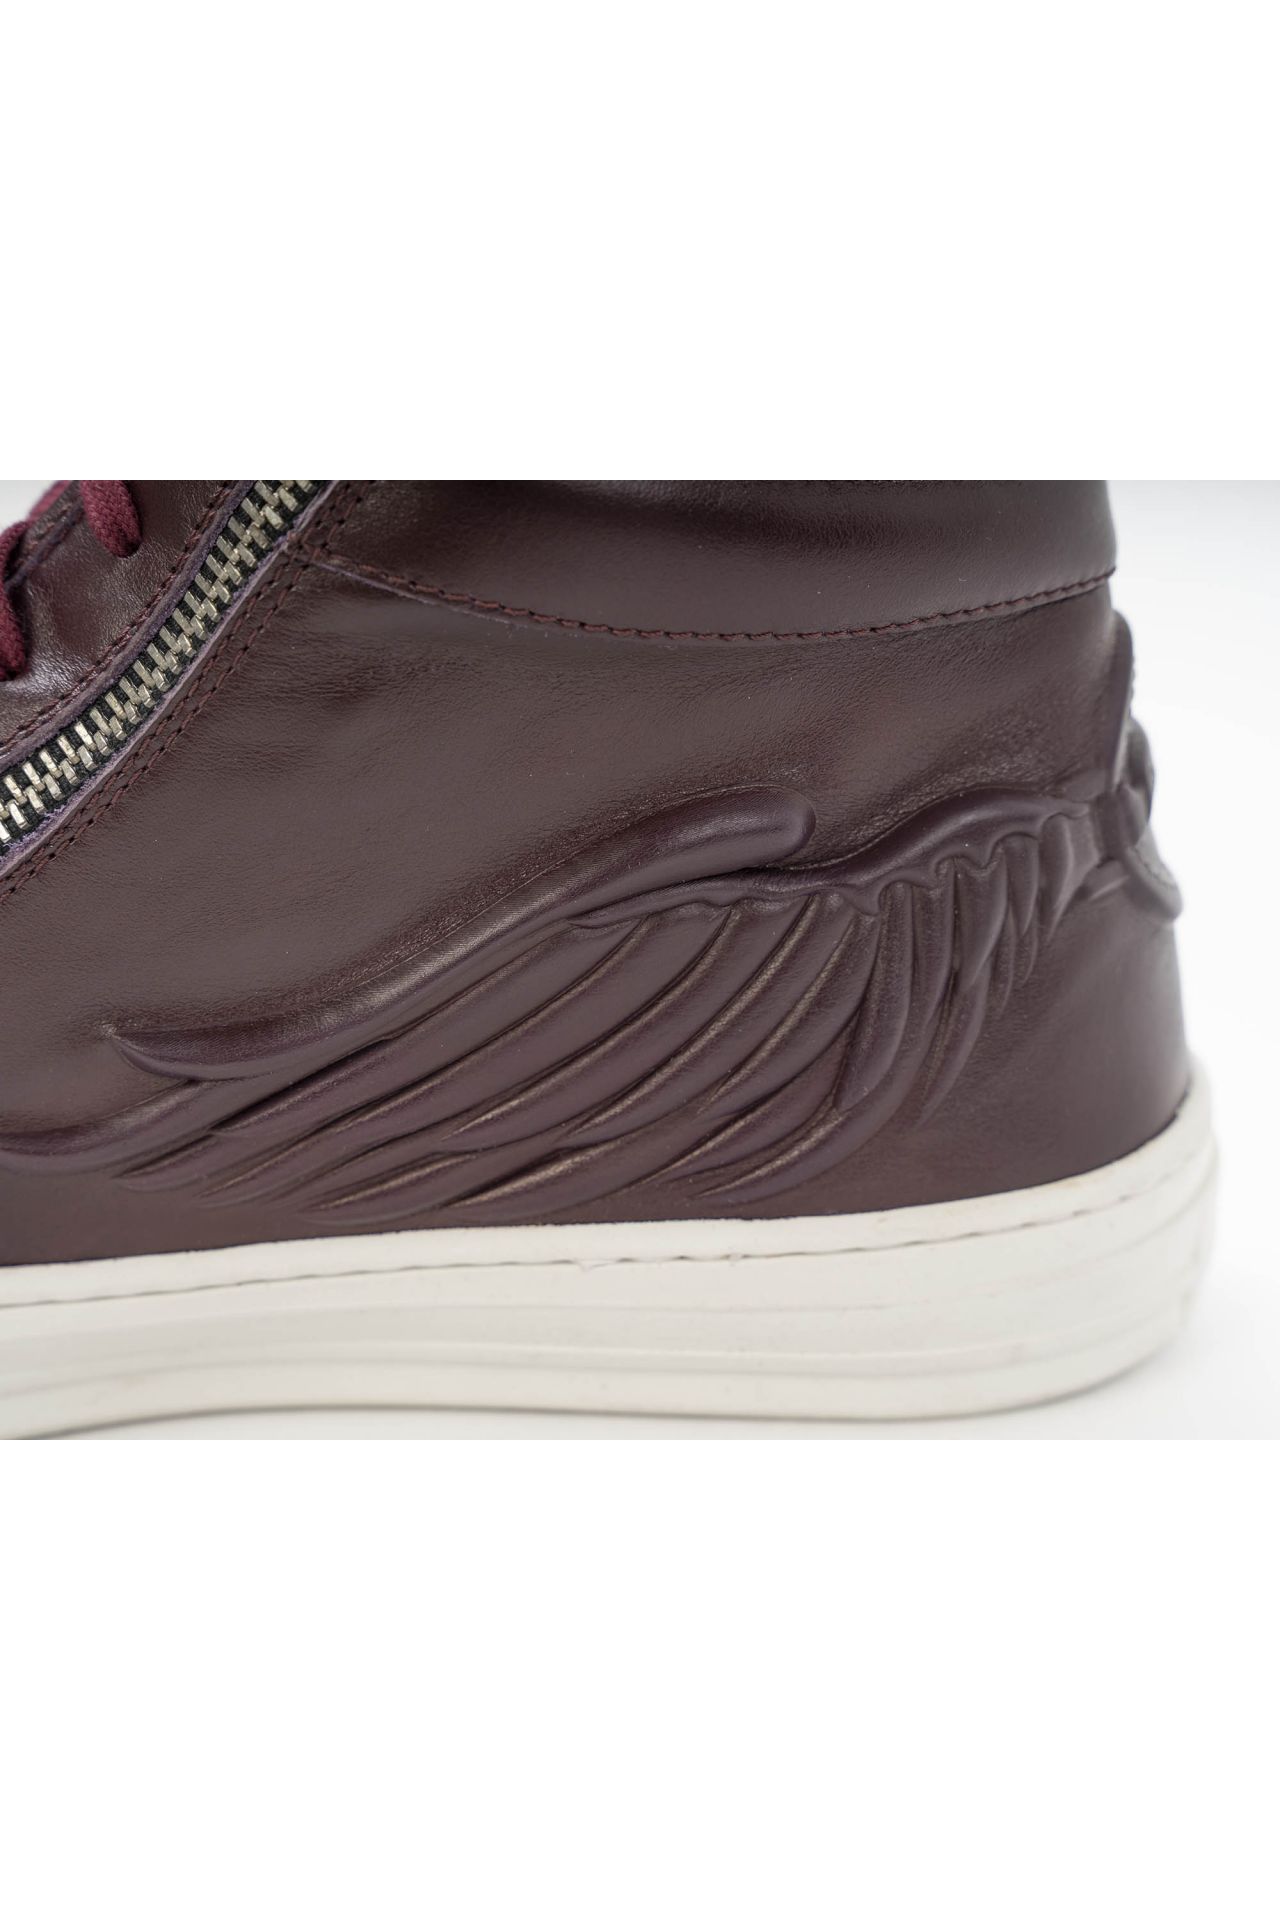 MENS HIGH TOP ZIPPER SNEAKERS IN LAMINATED BURGUNDY LEATHER